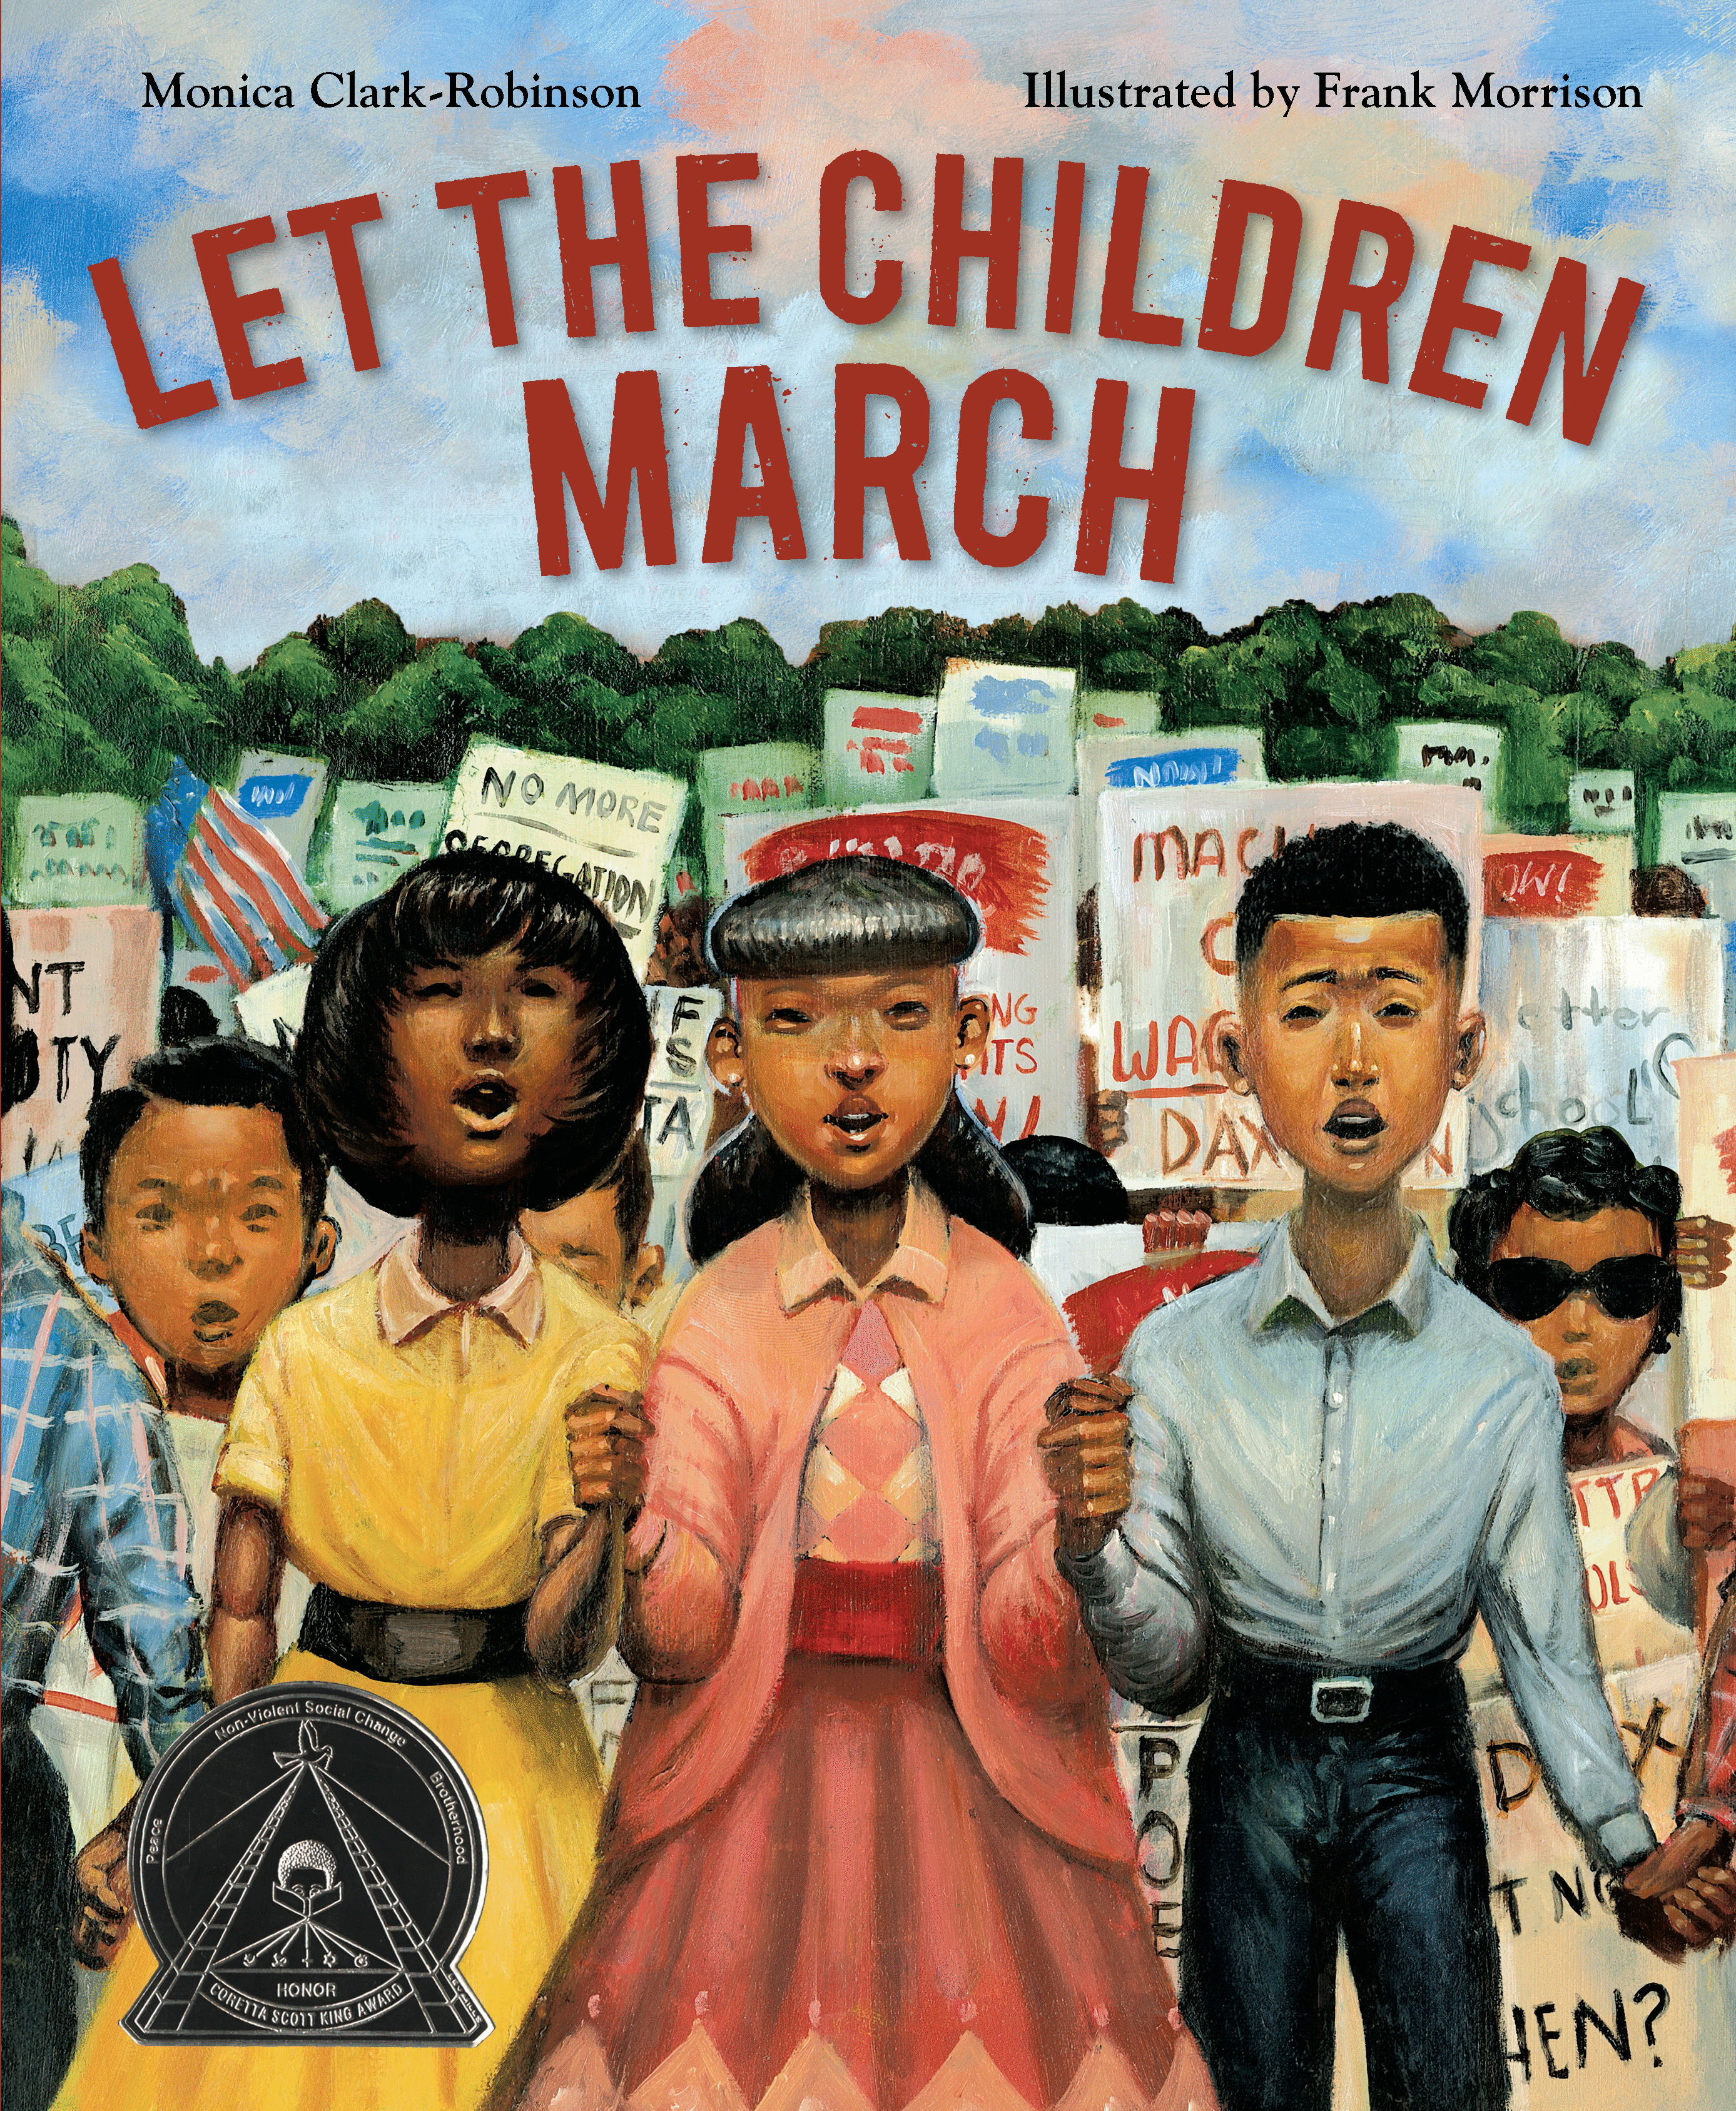 "Let the Children March" by Monica Clark-Robinson